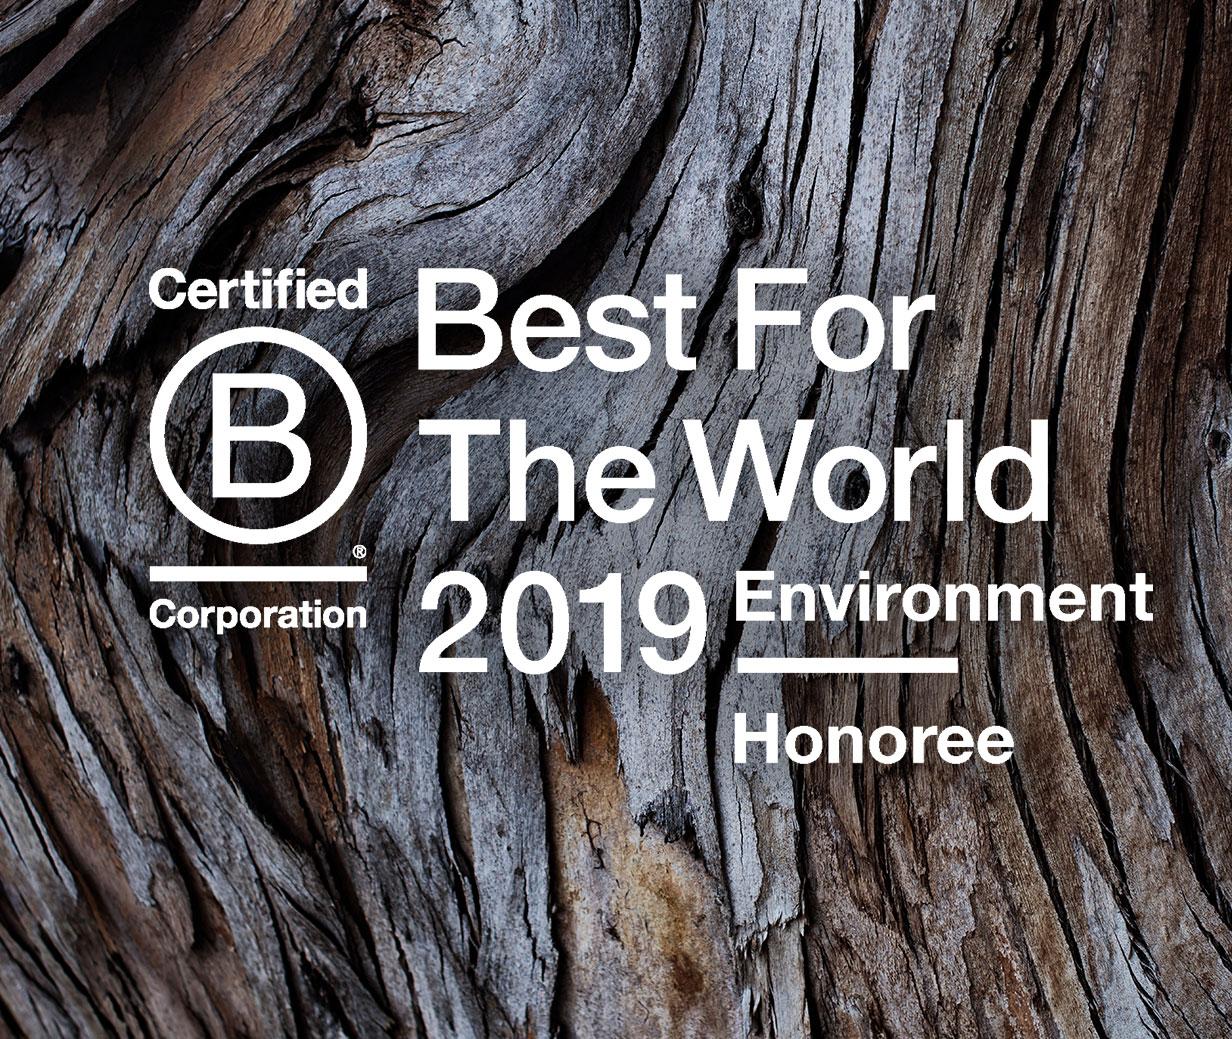 What does it mean to be a B Corp? 